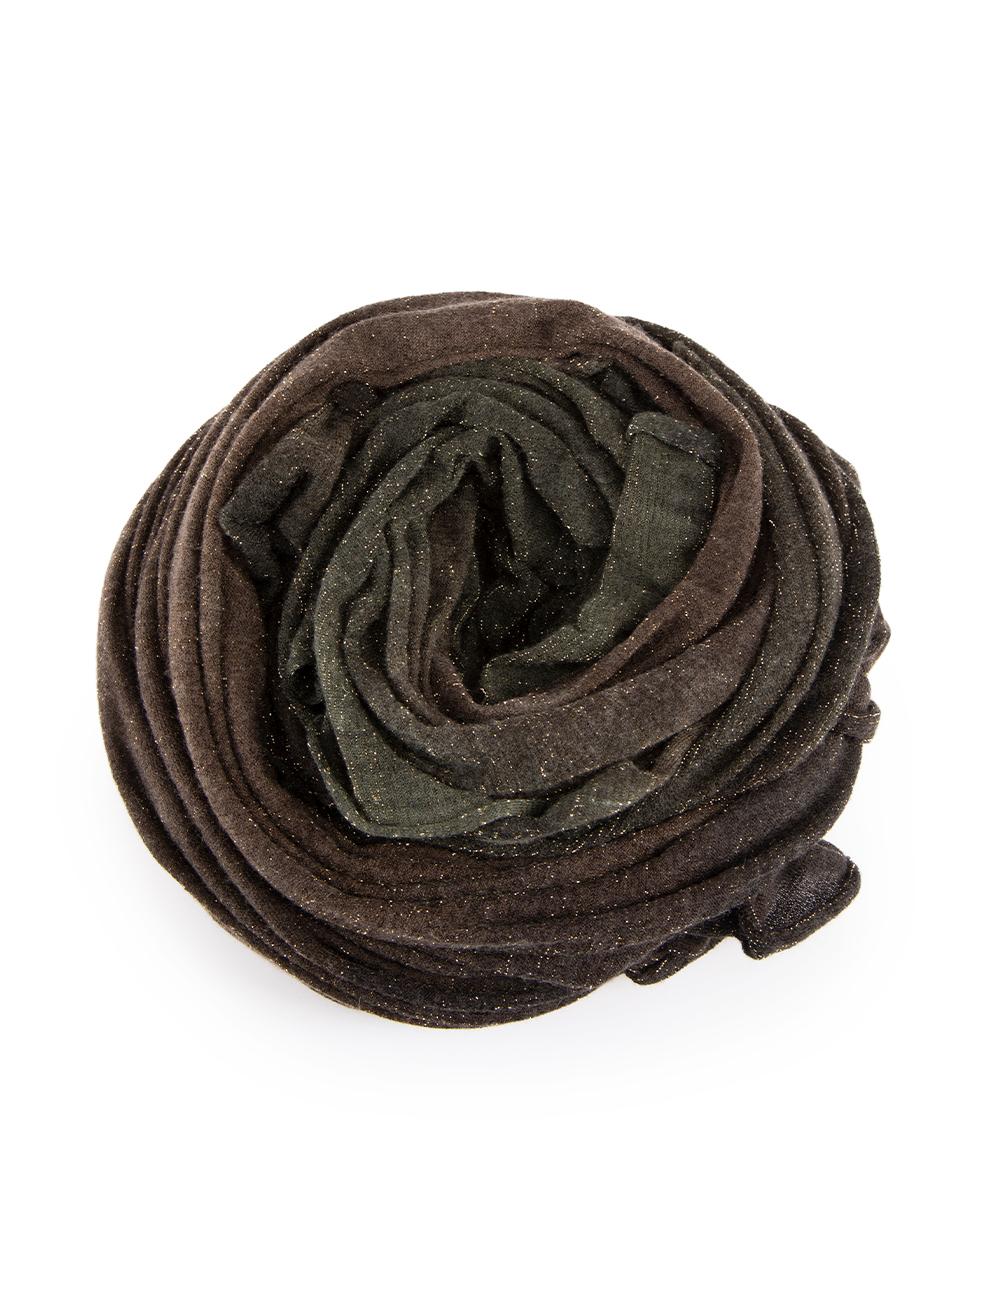 CONDITION is Very good. Hardly any visible wear to scarf is evident on this used Franco Ferrari designer resale item. Please note that the varying colours are part of the design.
 
 Details:
 Green and brown ombre
 Cashmere
 Scarf
 Gold metallic